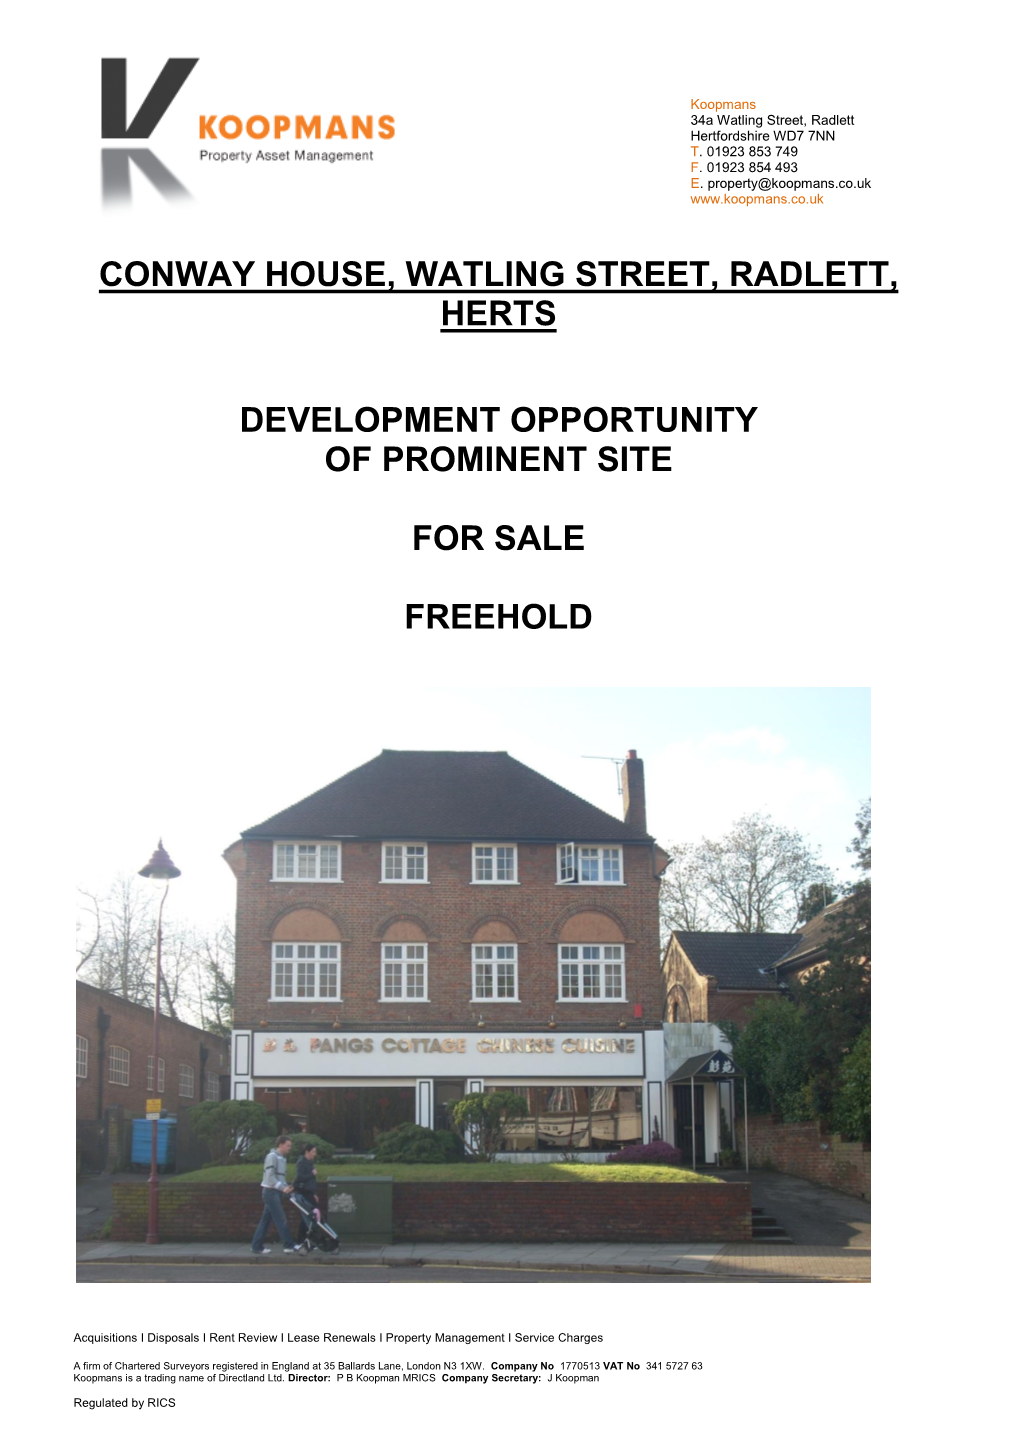 Conway House, Watling Street, Radlett, Herts Development Opportunity of Prominent Site for Sale Freehold